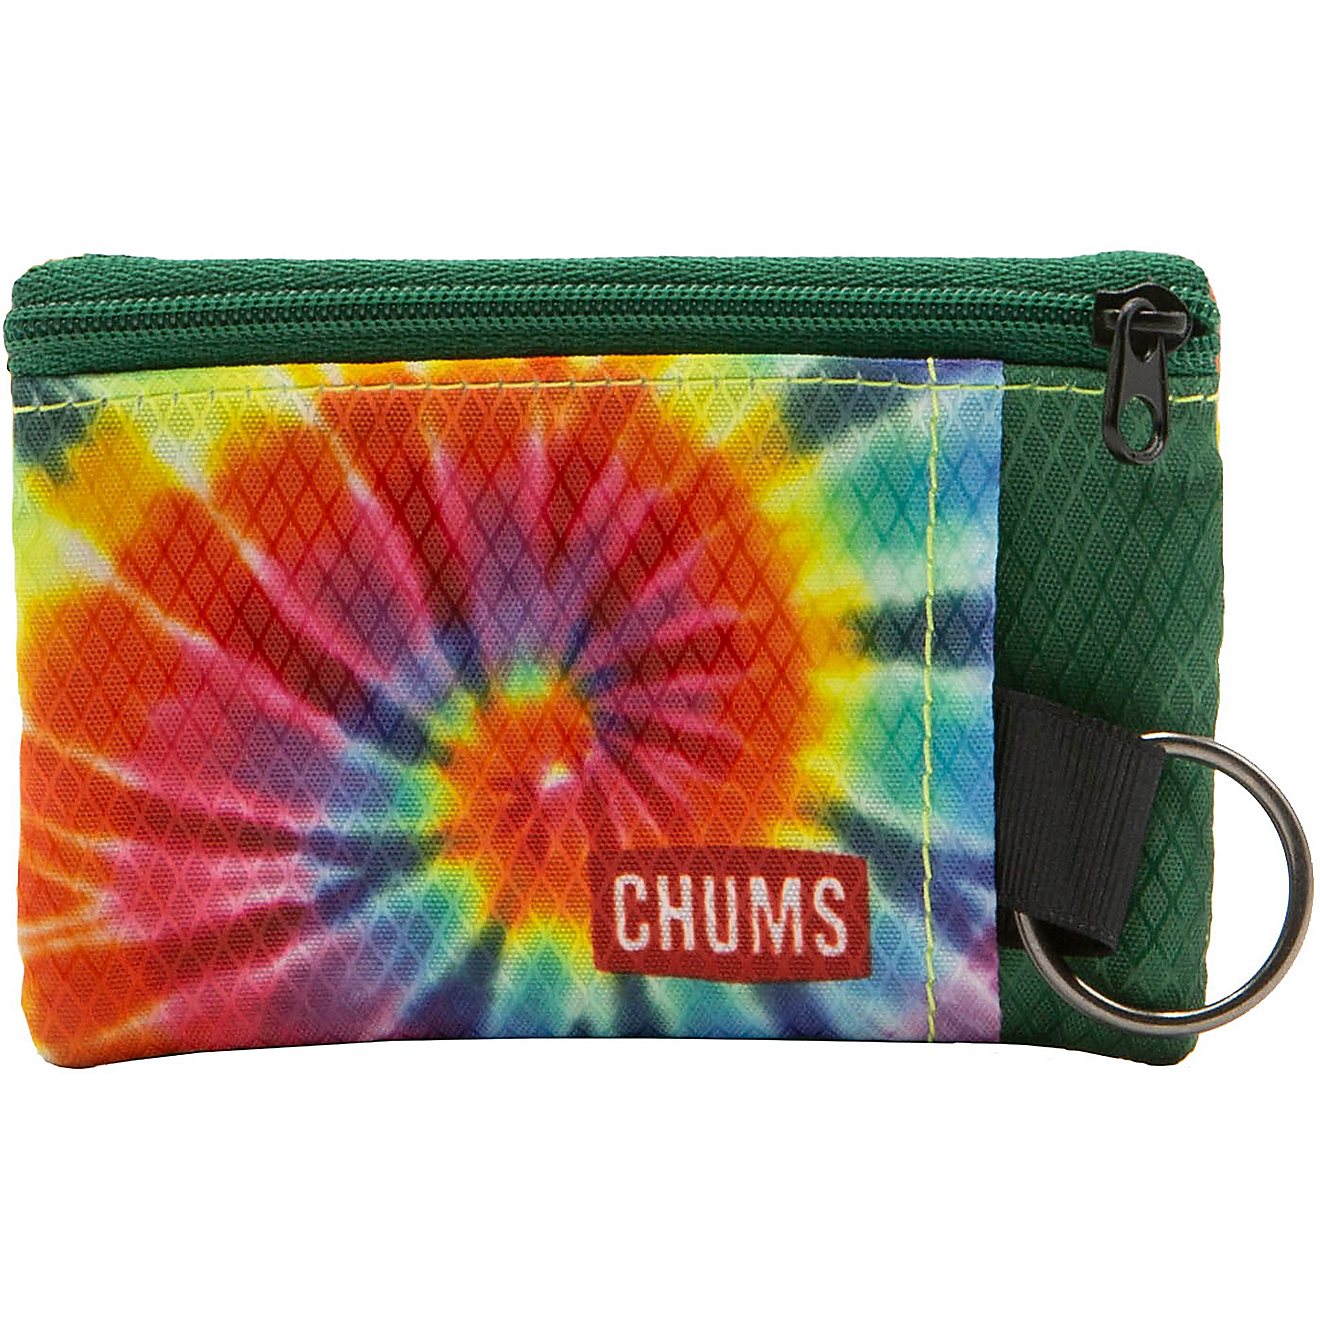 Chums Surfshort Wallet                                                                                                           - view number 6